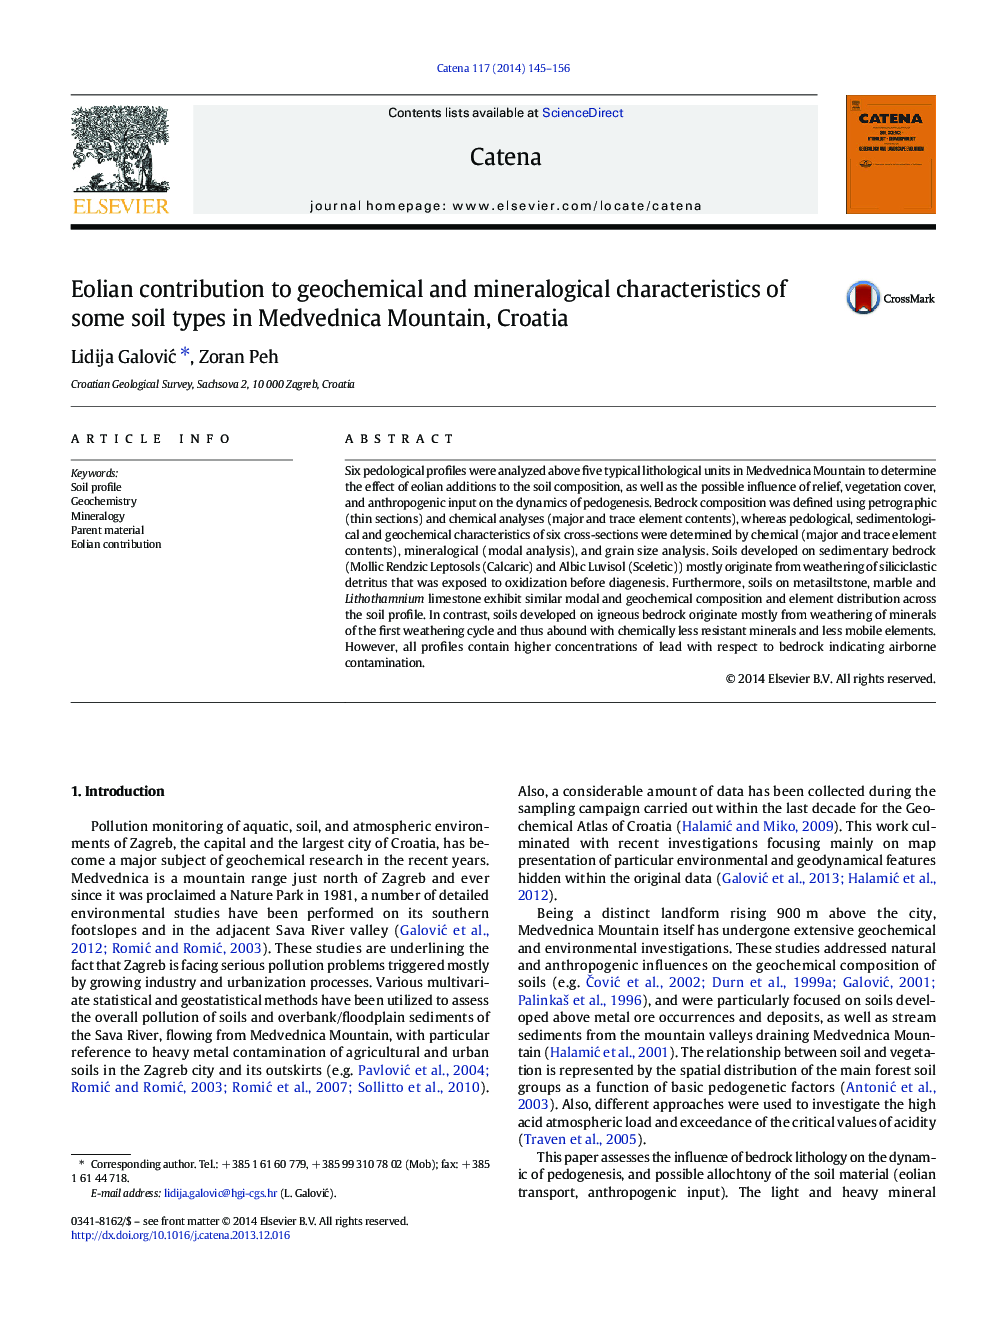 Eolian contribution to geochemical and mineralogical characteristics of some soil types in Medvednica Mountain, Croatia